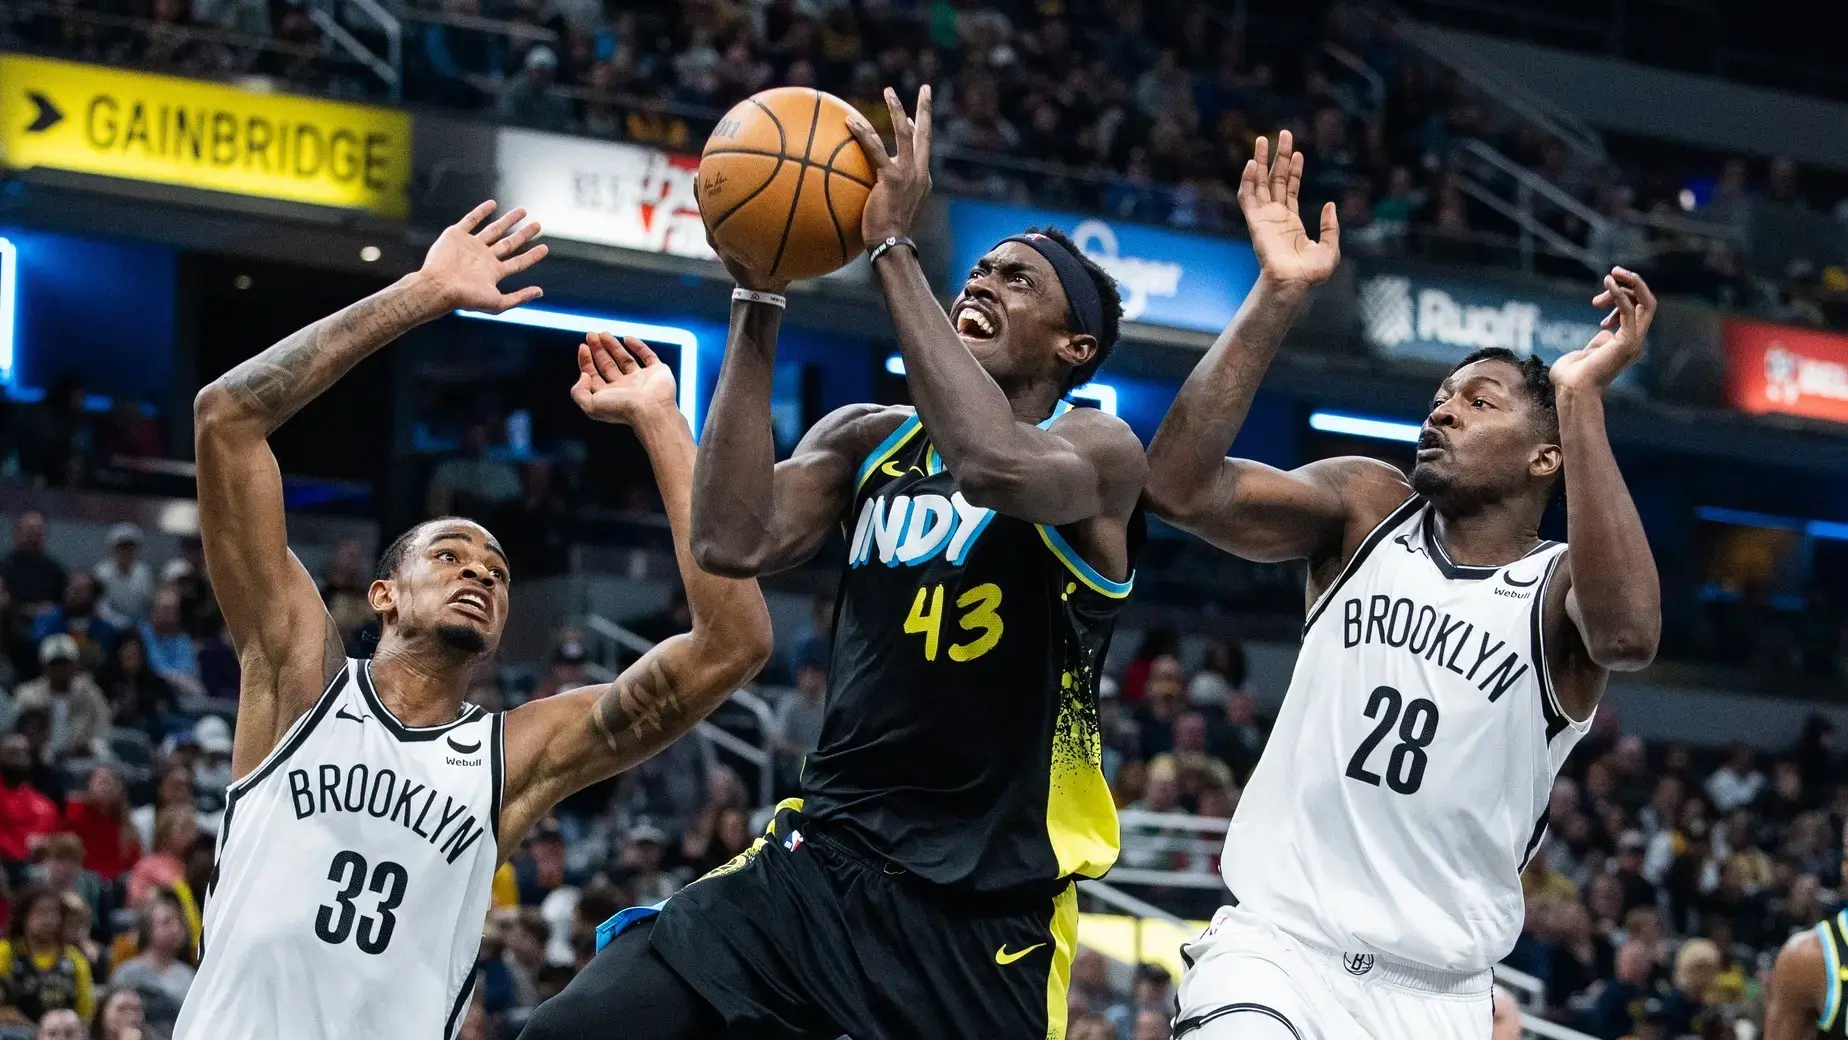 Indiana Pacers forward Pascal Siakam (43) shoots the ball while Brooklyn Nets center Nic Claxton (33) and forward Dorian Finney-Smith (28) defend in the first half at Gainbridge Fieldhouse. / Trevor Ruszkowski-USA TODAY Sports